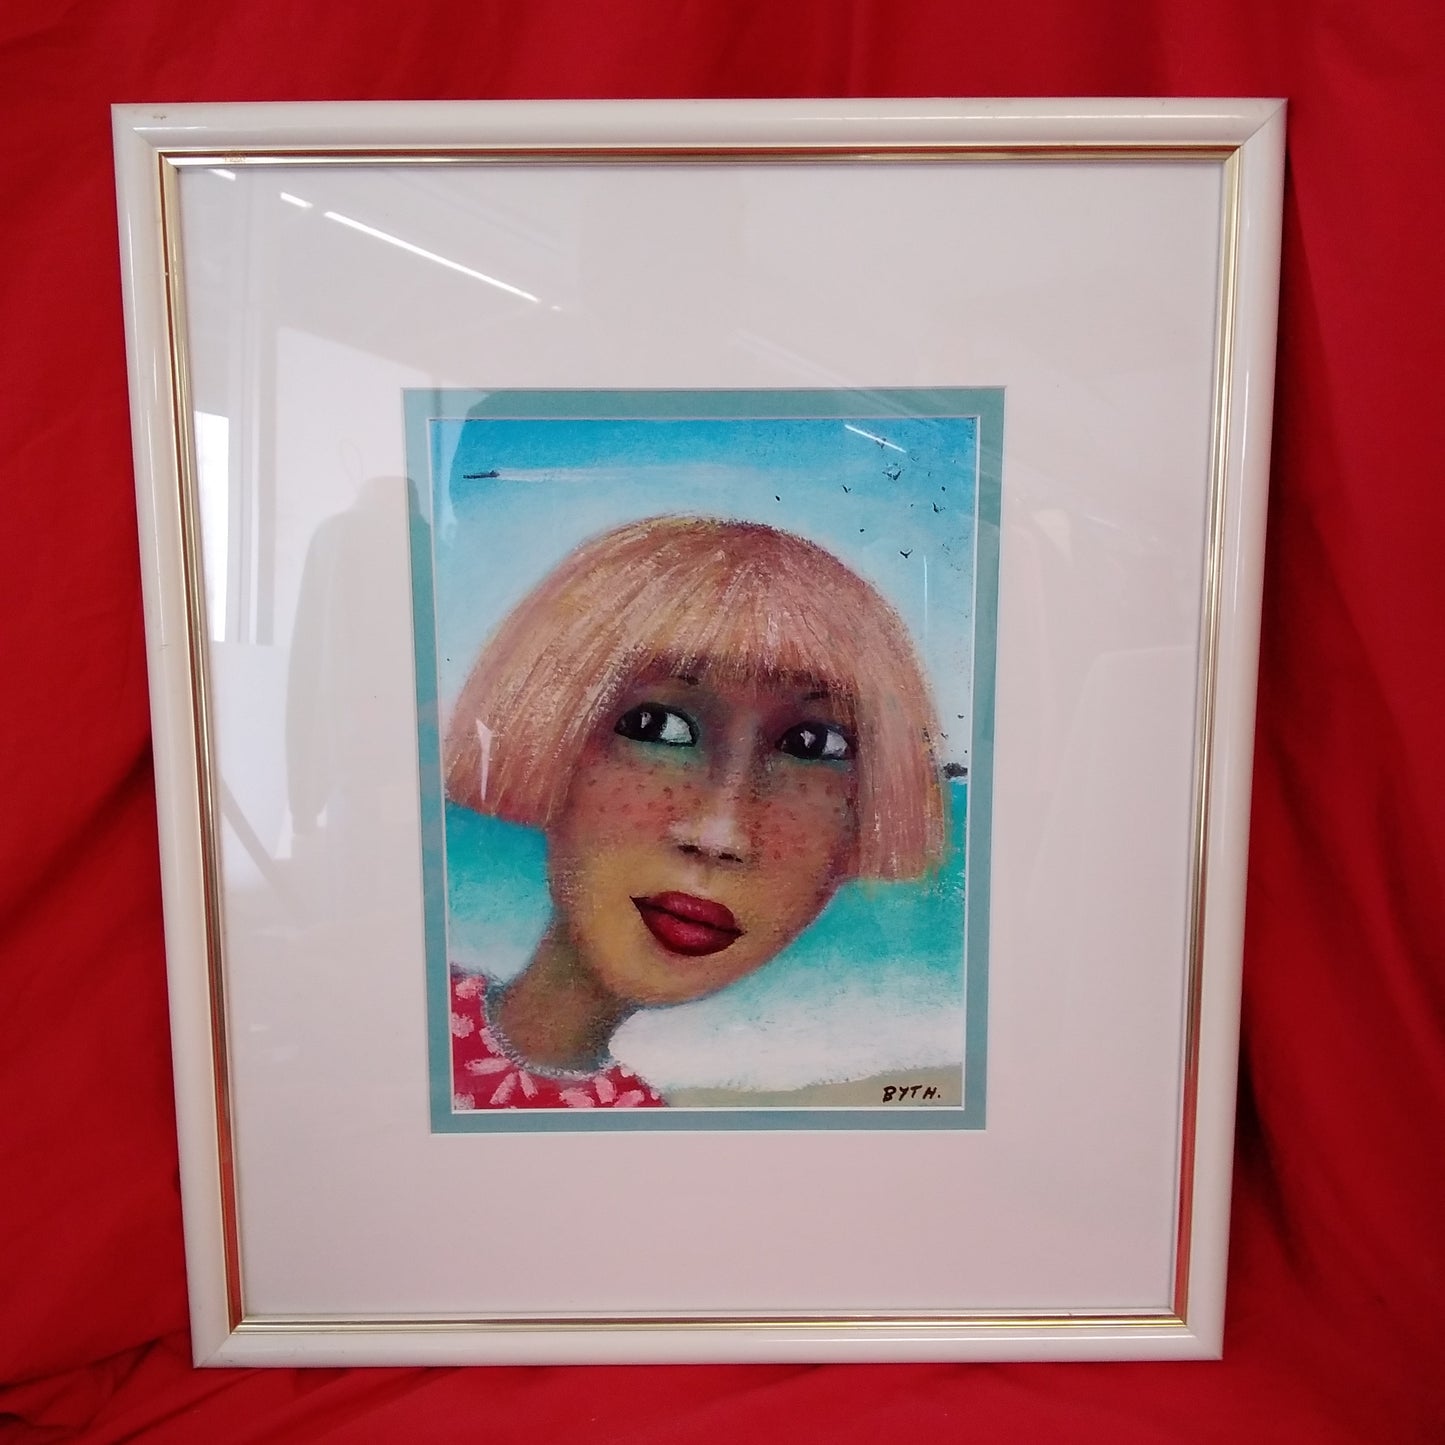 Wonderful Framed Oil Painting of a Lady at the Beach by S. BYTH